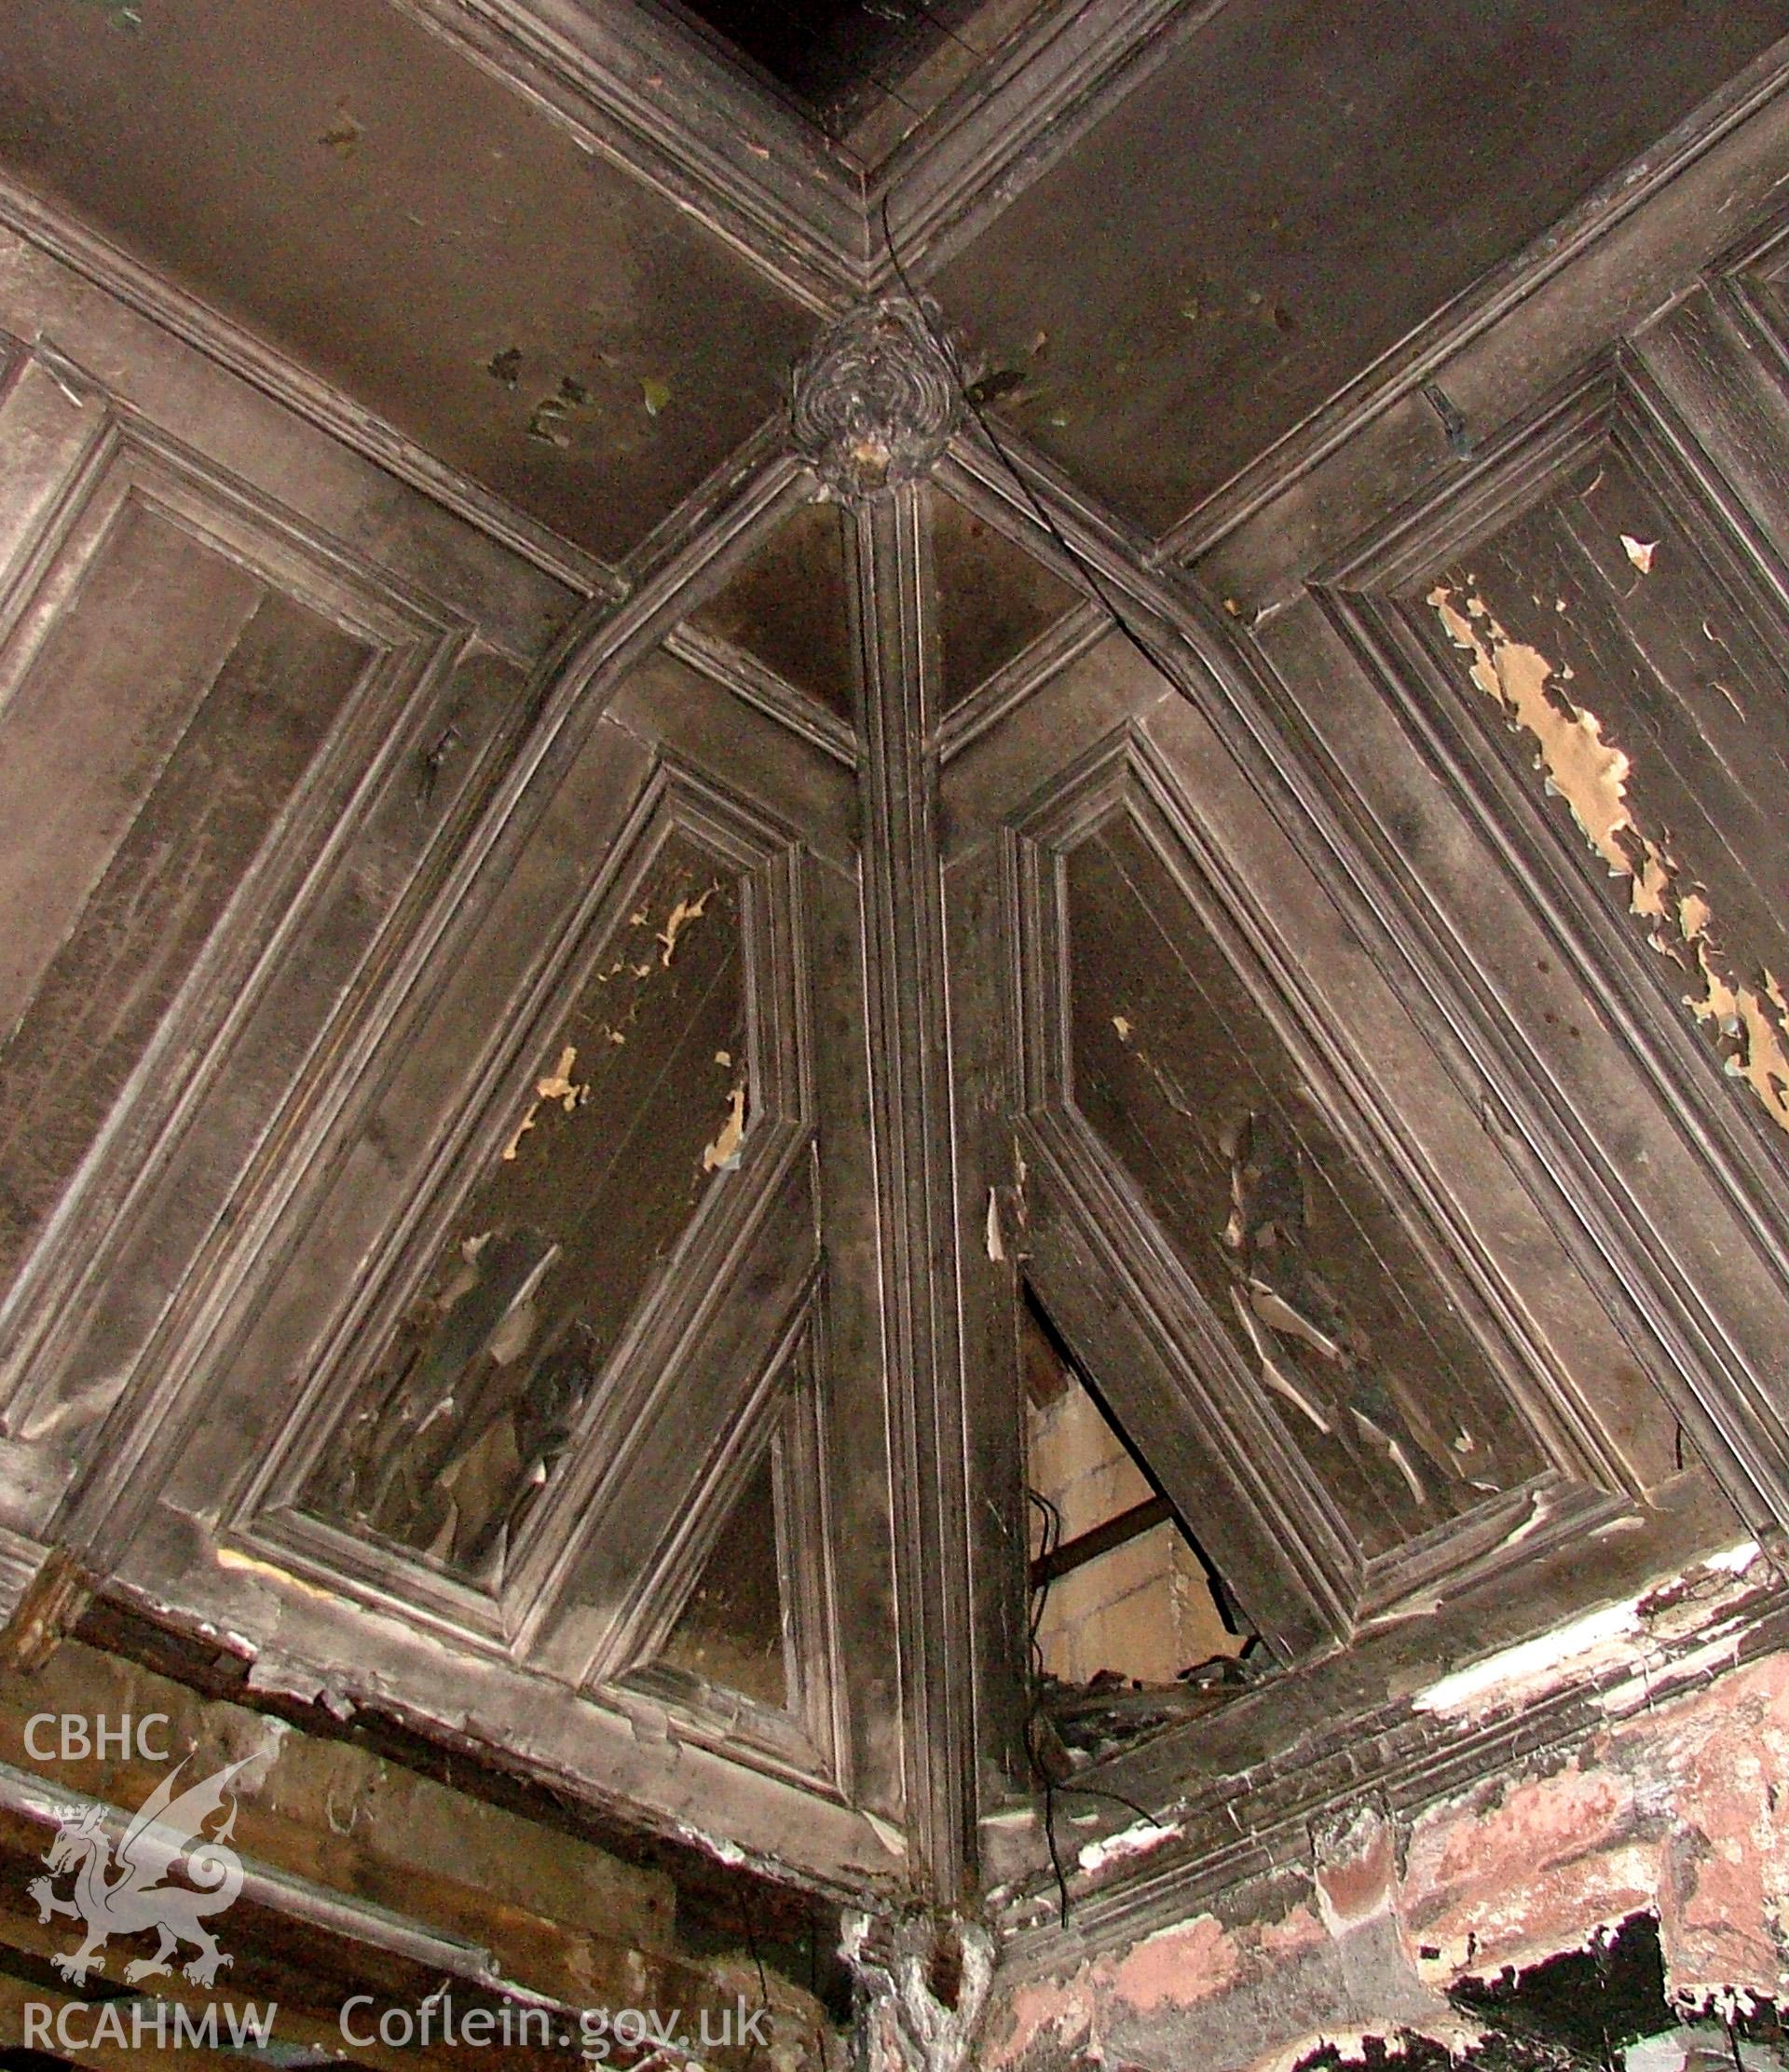 Ceiling structure of the first floor hall at Malpas Court, detail of corner.